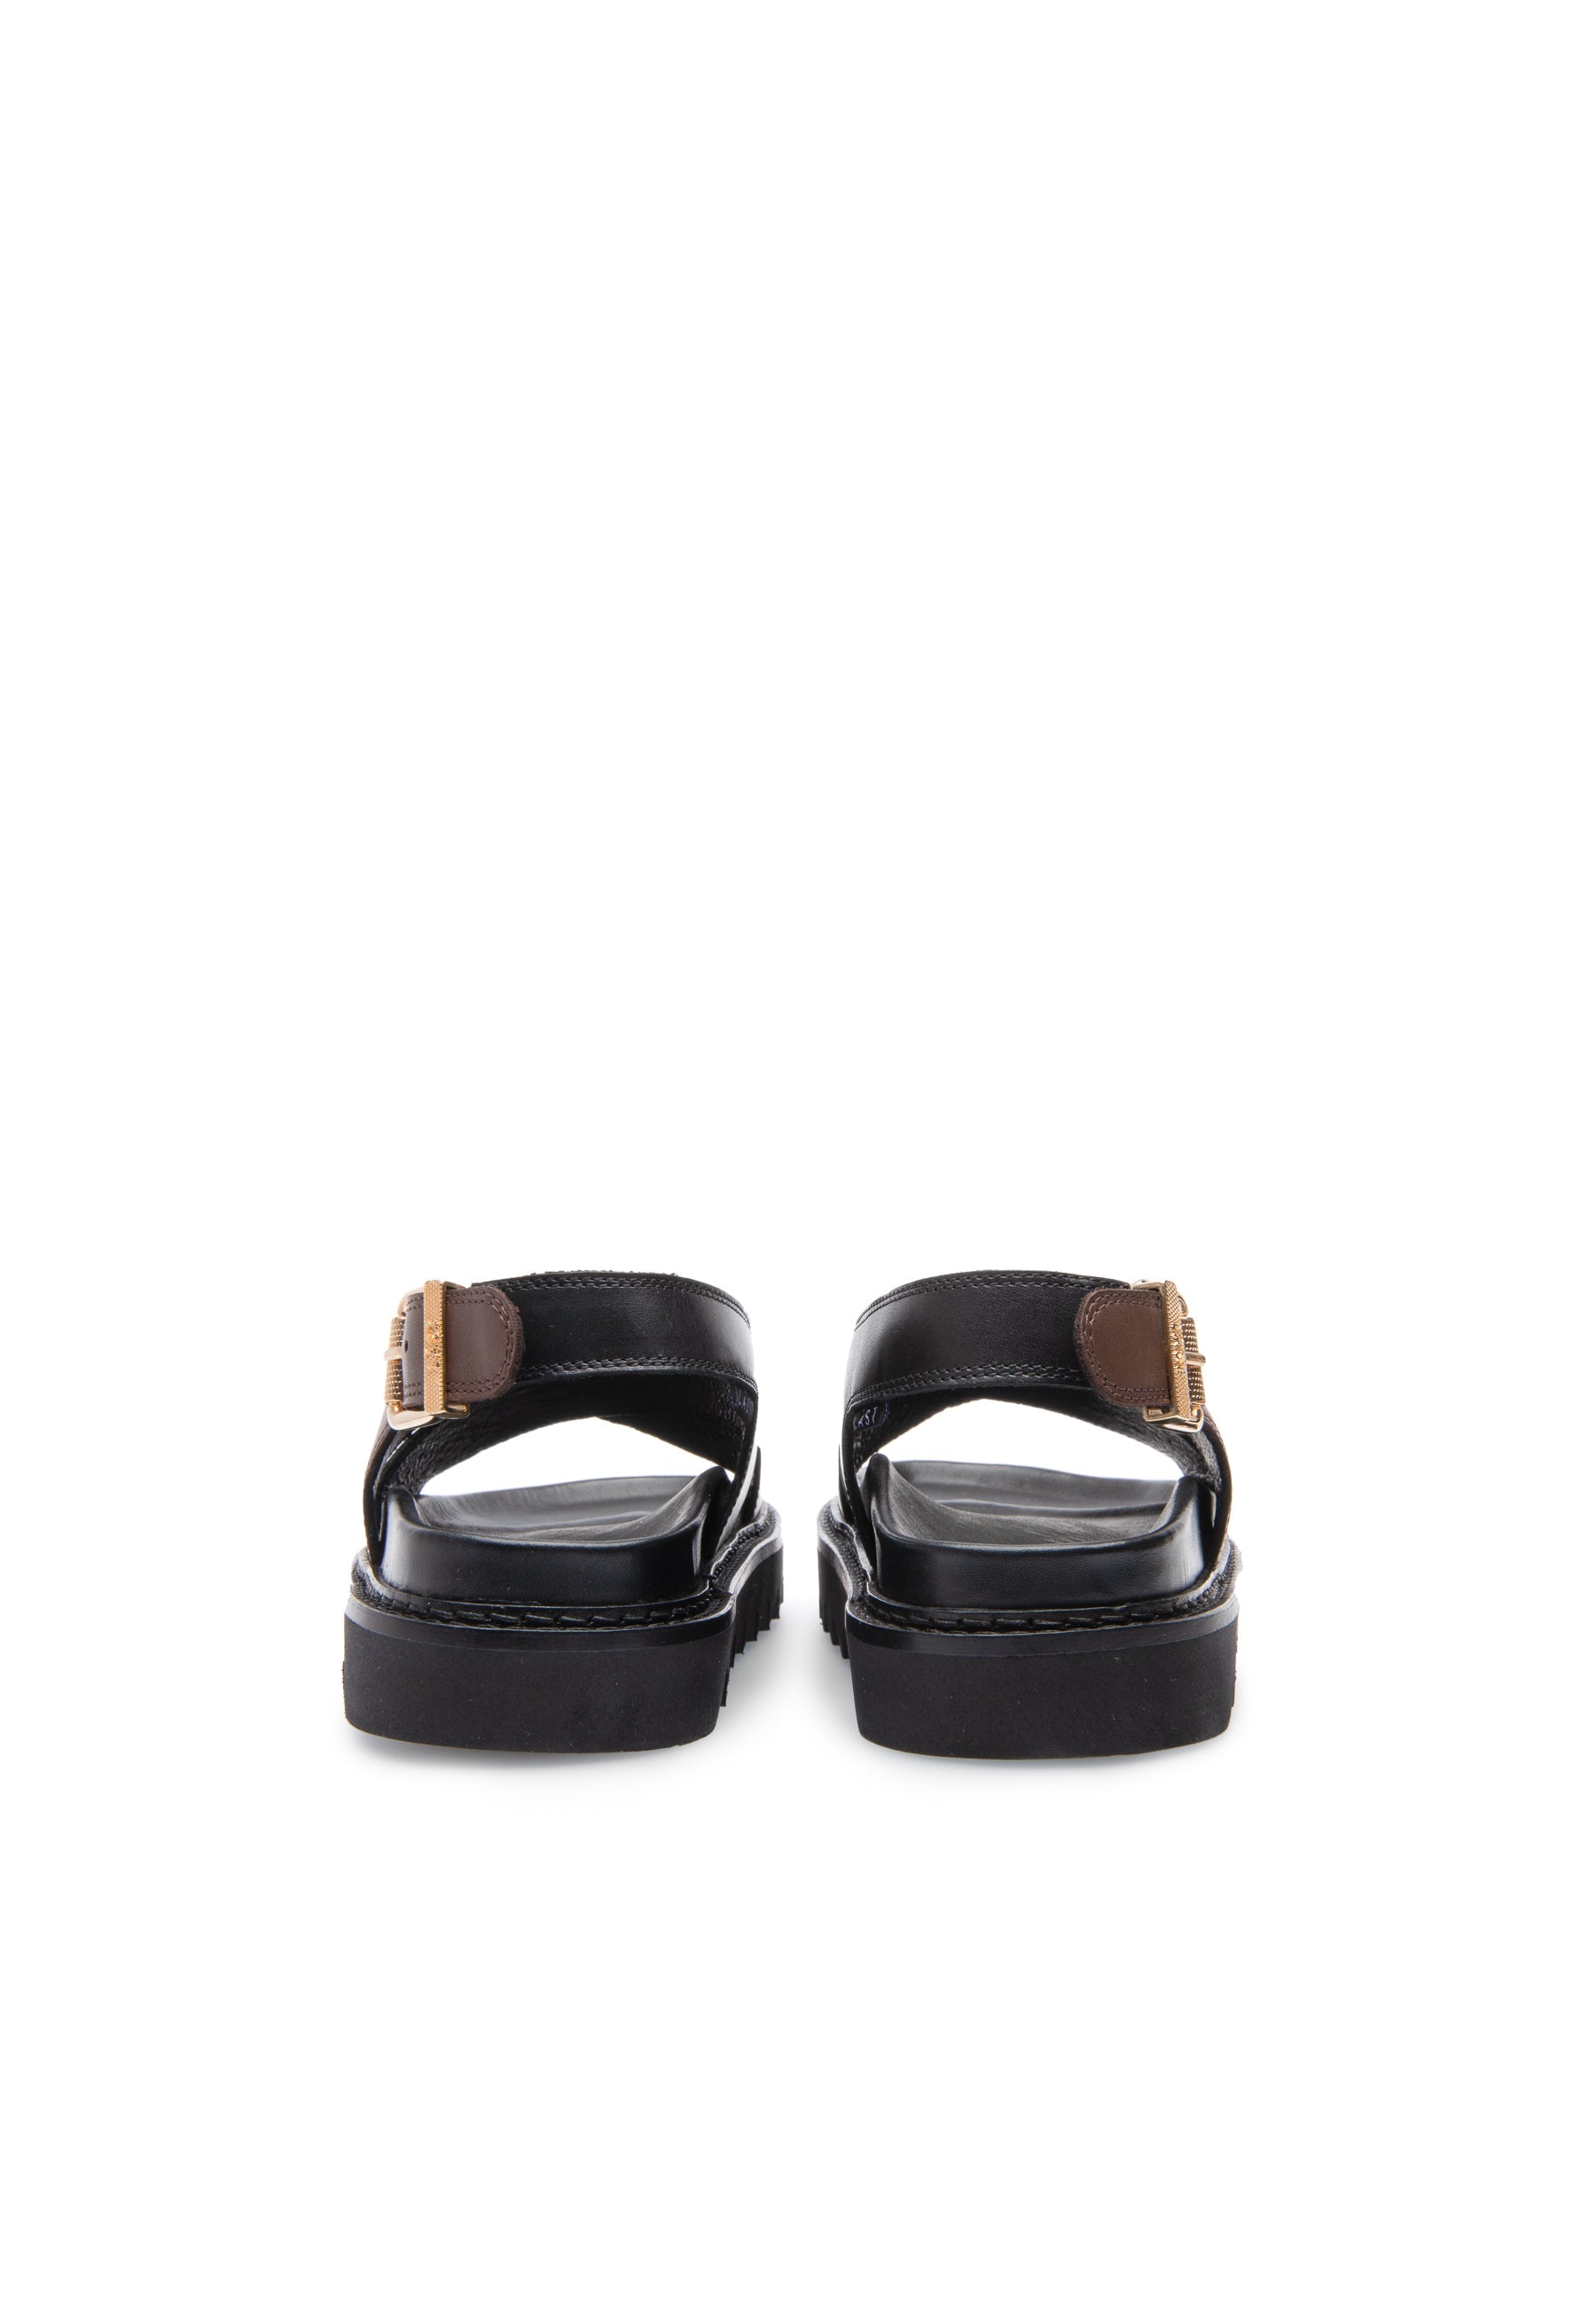 Diana Black Brown Leather Chunky Sandals LAST1521 - 5